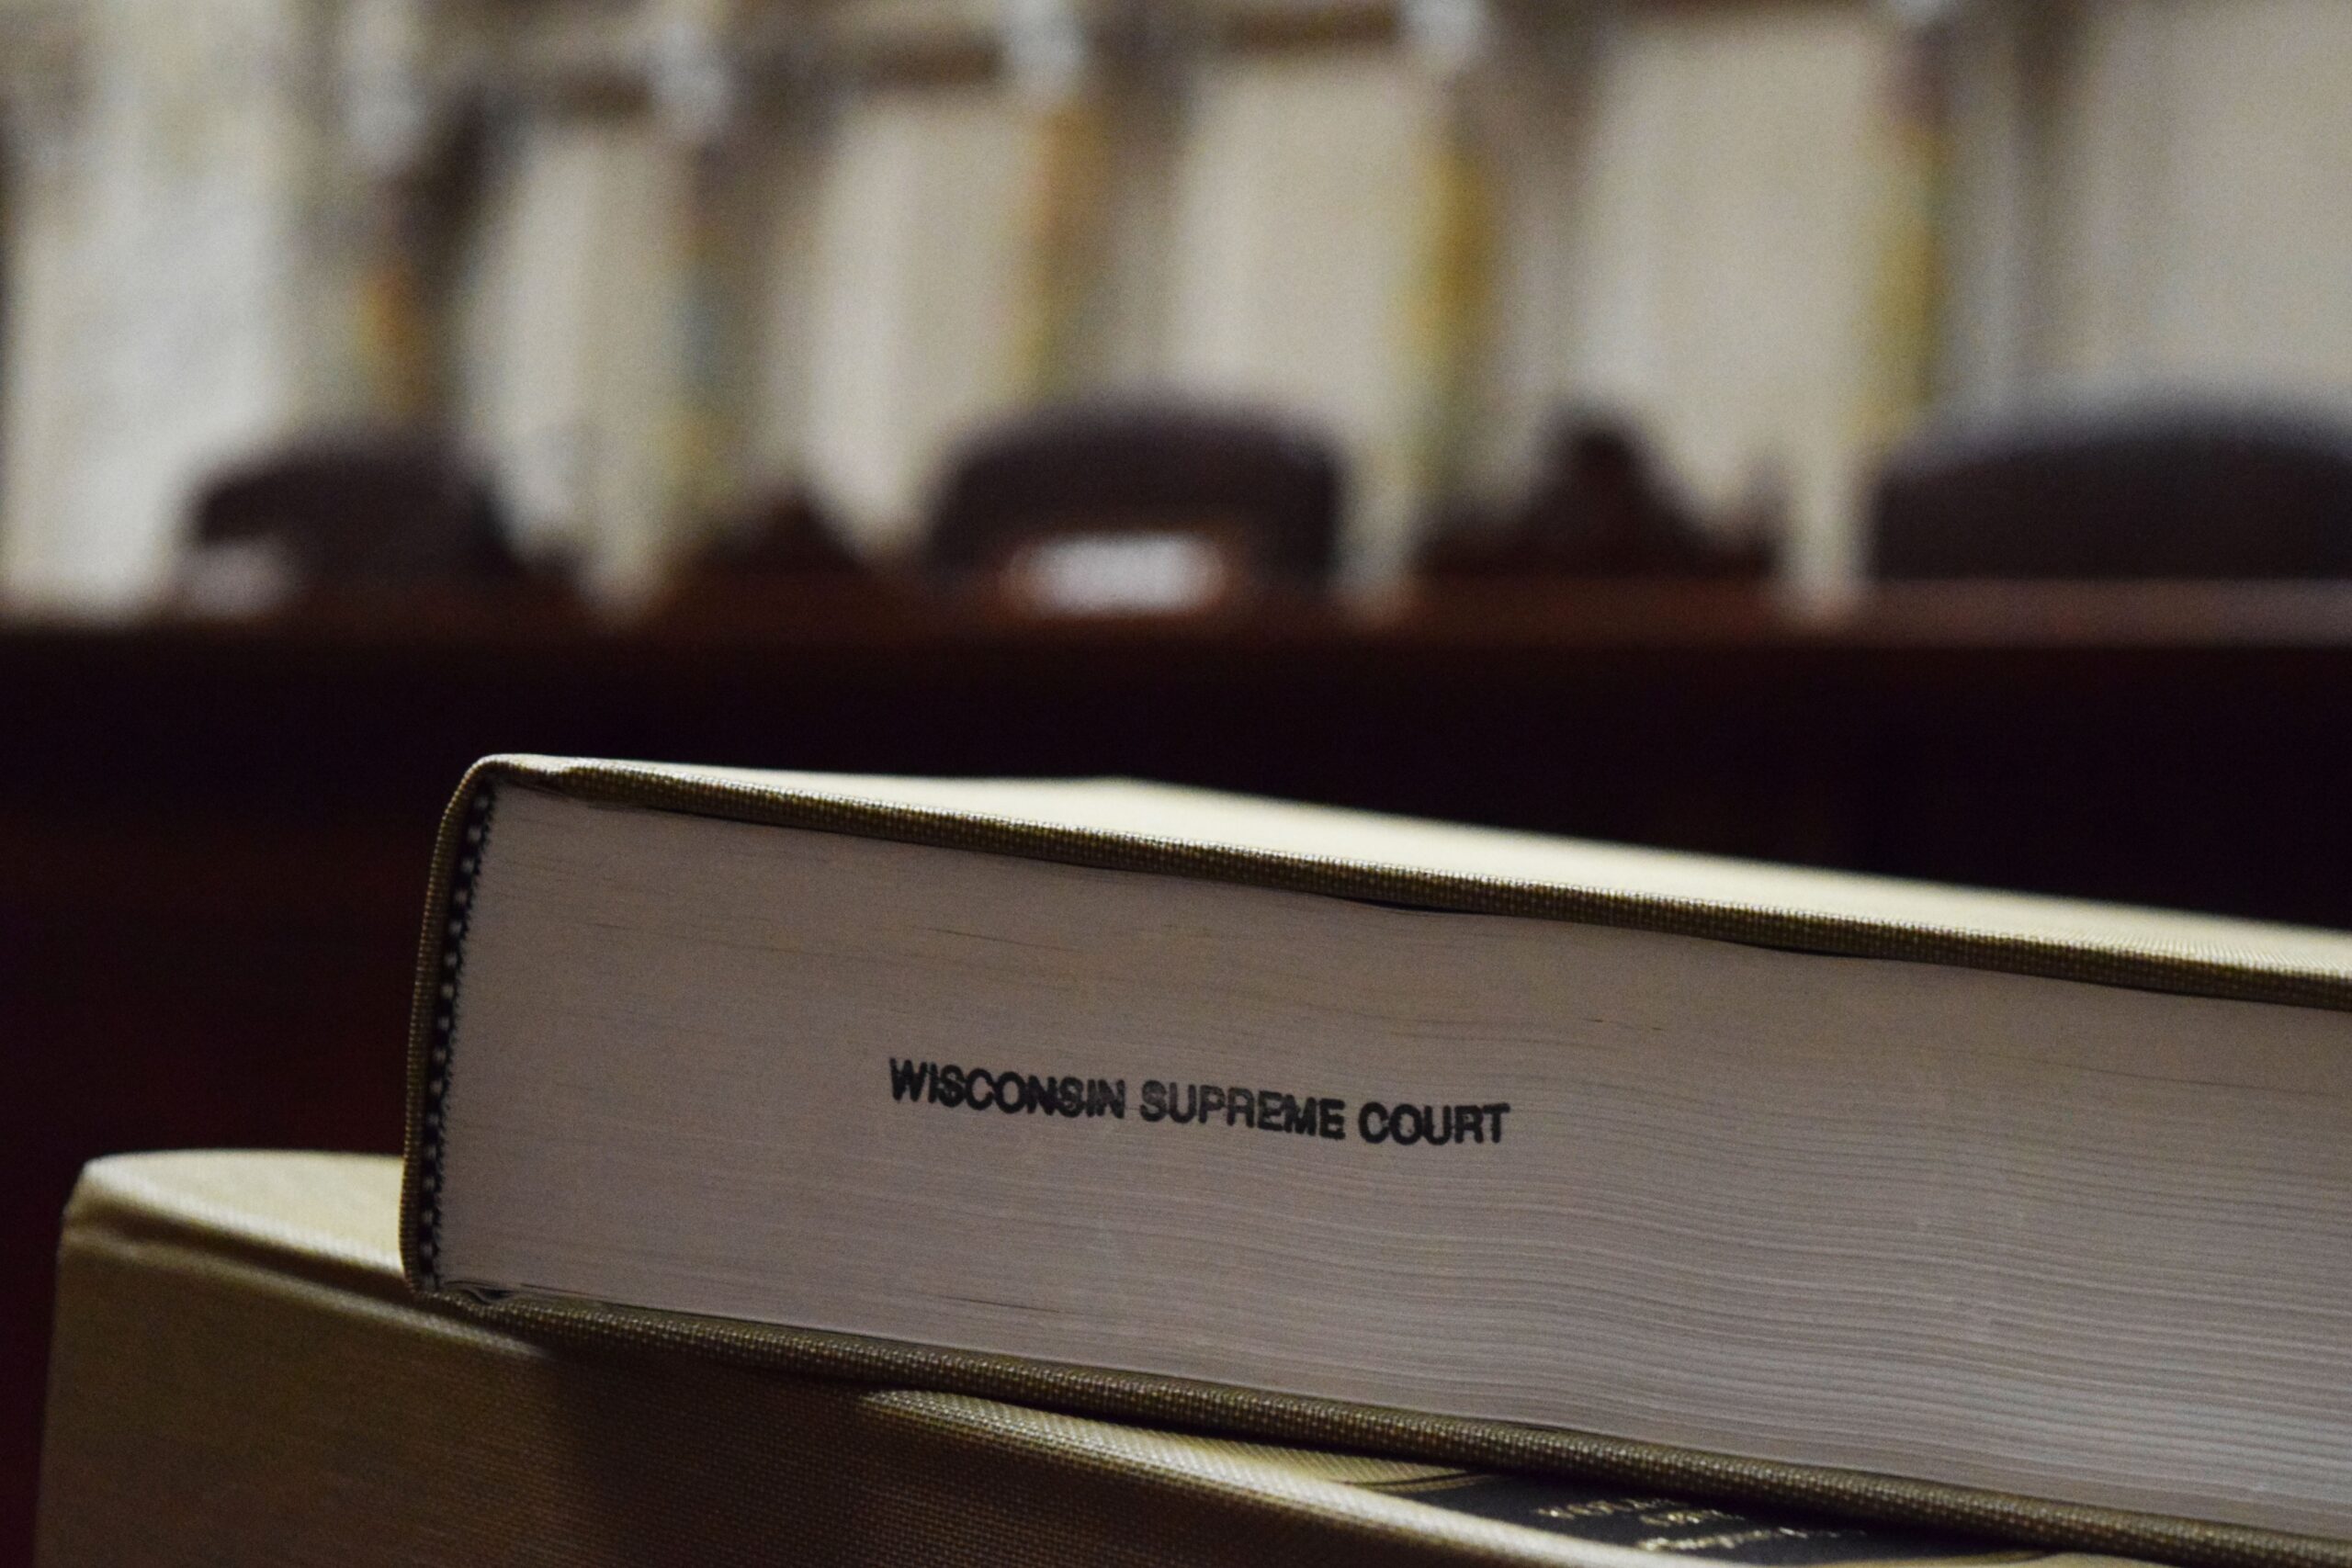 Law books in the Wisconsin Supreme Court courtroom